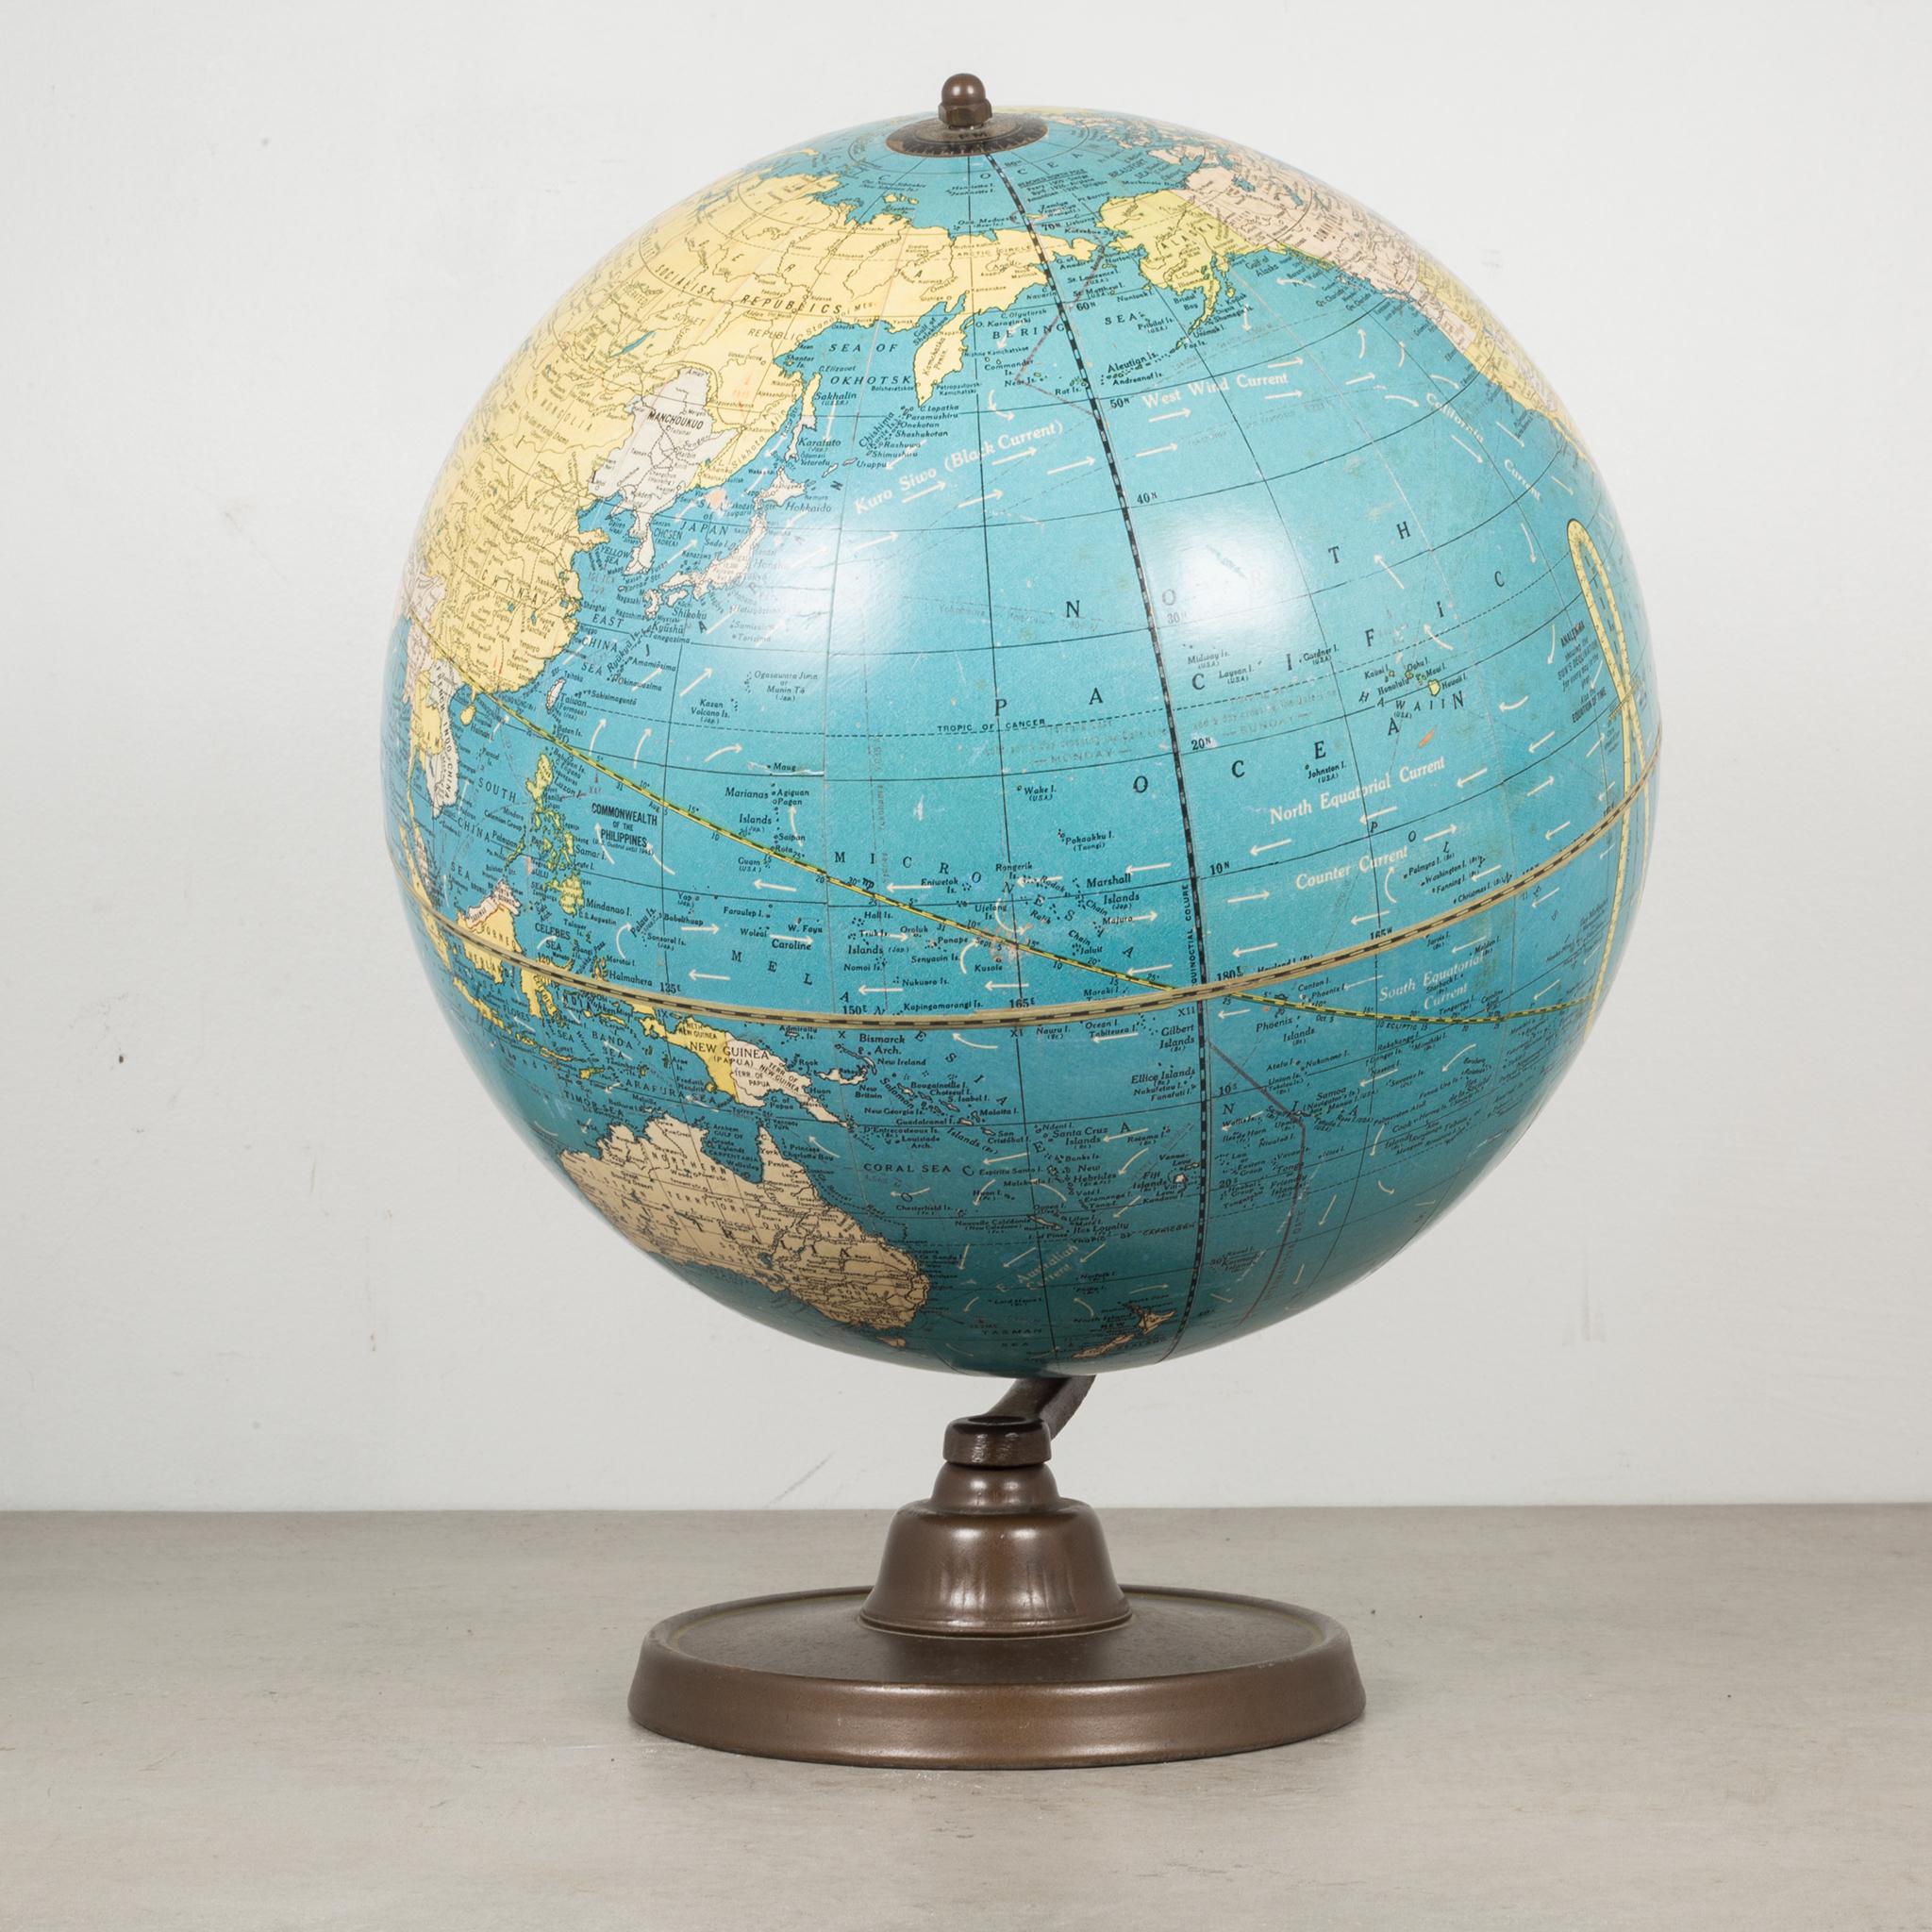 About

This is an original cram's universal globe mounted on a stylized brass-plated metal pedestal.

 Creator: George F. Cram Company, Indianapolis, IN.
 Date of manufacture: circa Pre 1948.
 Materials and techniques: Metal, paper.
